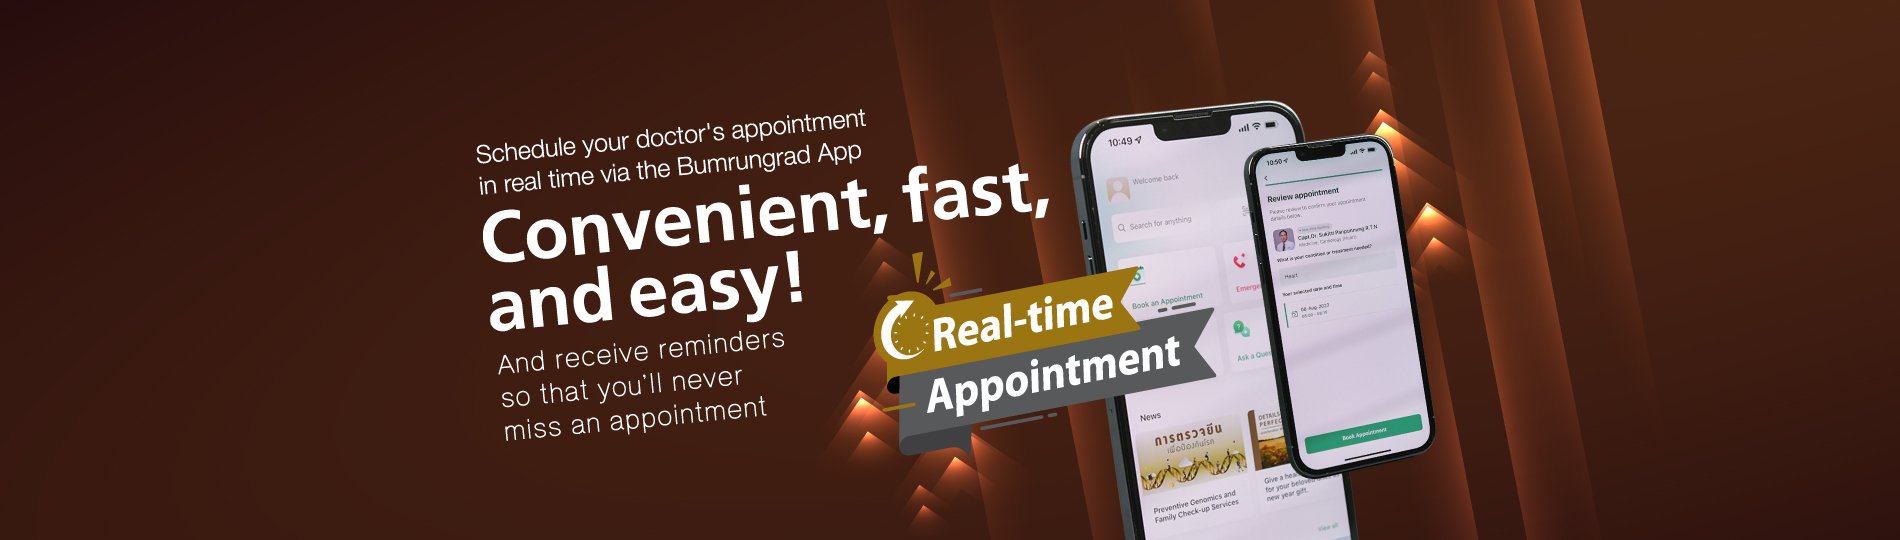 CONVENIENTLY MAKE REAL-TIME APPOINTMENT BY YOURSELF